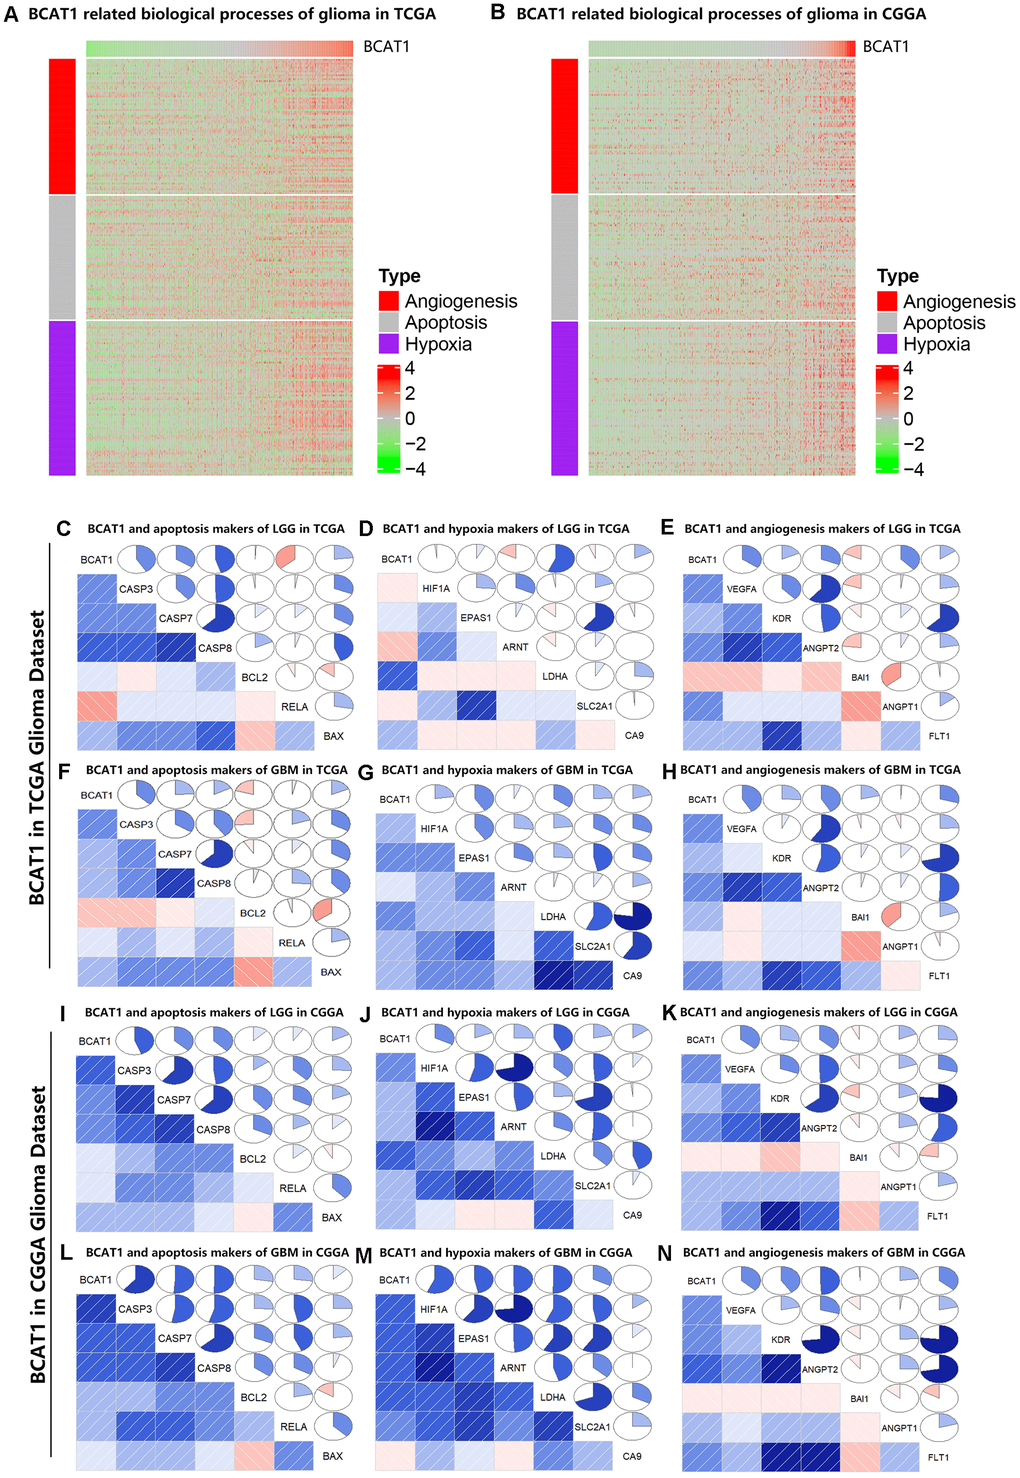 BCAT1 is correlated with apoptosis, hypoxia and angiogenesis processes in gliomas. (A, B) Heatmaps showing the expression patterns of angiogenesis, apoptosis and hypoxia markers in glioma patients according to BCAT1 expression based on TCGA and CGGA datasets. (C–E) The relation between BCAT1 expression and apoptosis, hypoxia and angiogenesis markers in LGG of TCGA dataset. (F–H) The relation between BCAT1 expression and apoptosis, hypoxia and angiogenesis markers in GBM of TCGA dataset. (I–K) The relation between BCAT1 and apoptosis, hypoxia and angiogenesis markers in LGG of CGGA dataset. (L–N) The relation between BCAT1 and apoptosis, hypoxia and angiogenesis markers in GBM of CGGA dataset.